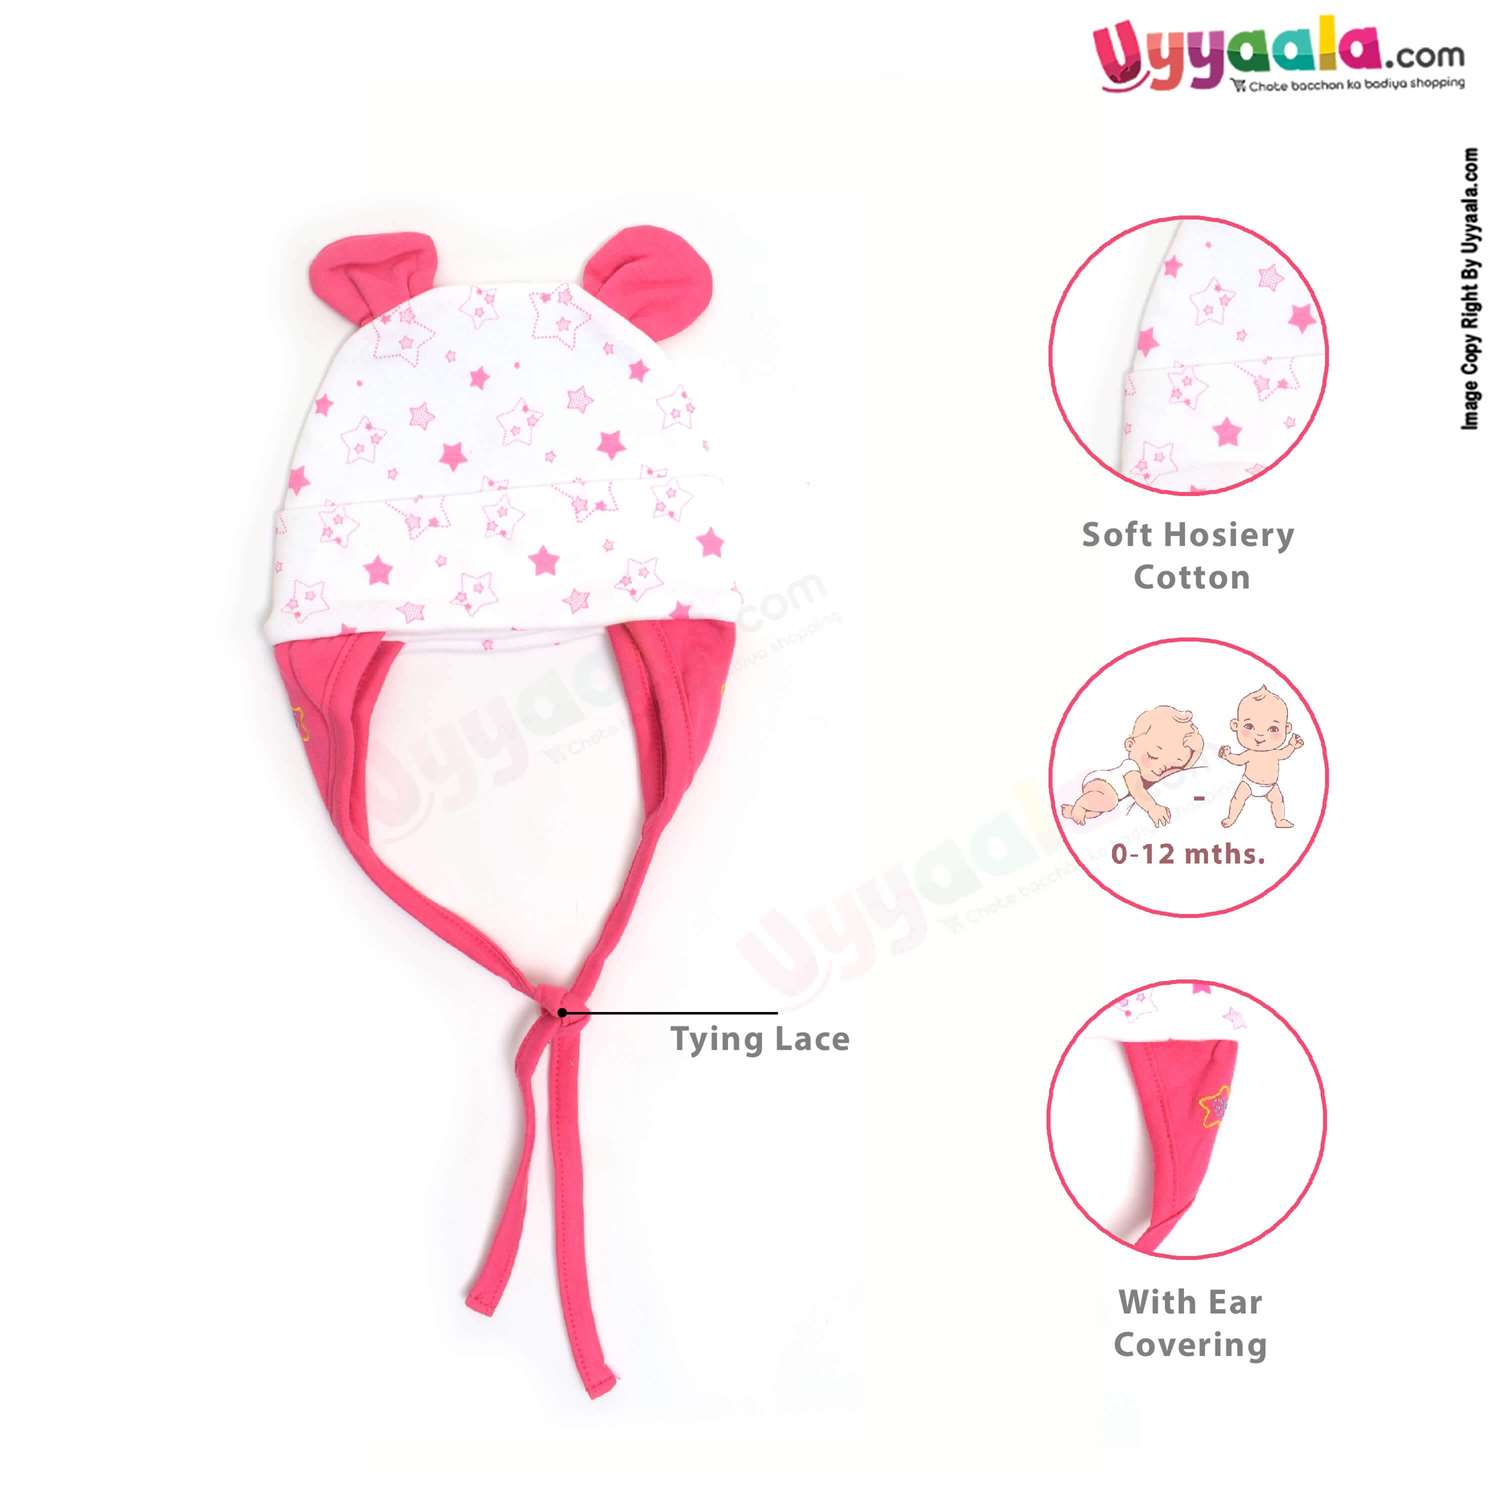 Fancy Round Cap for Babies with Stretchable Soft Hosiery Material, Stars Print 0-12m Age - Multi Color